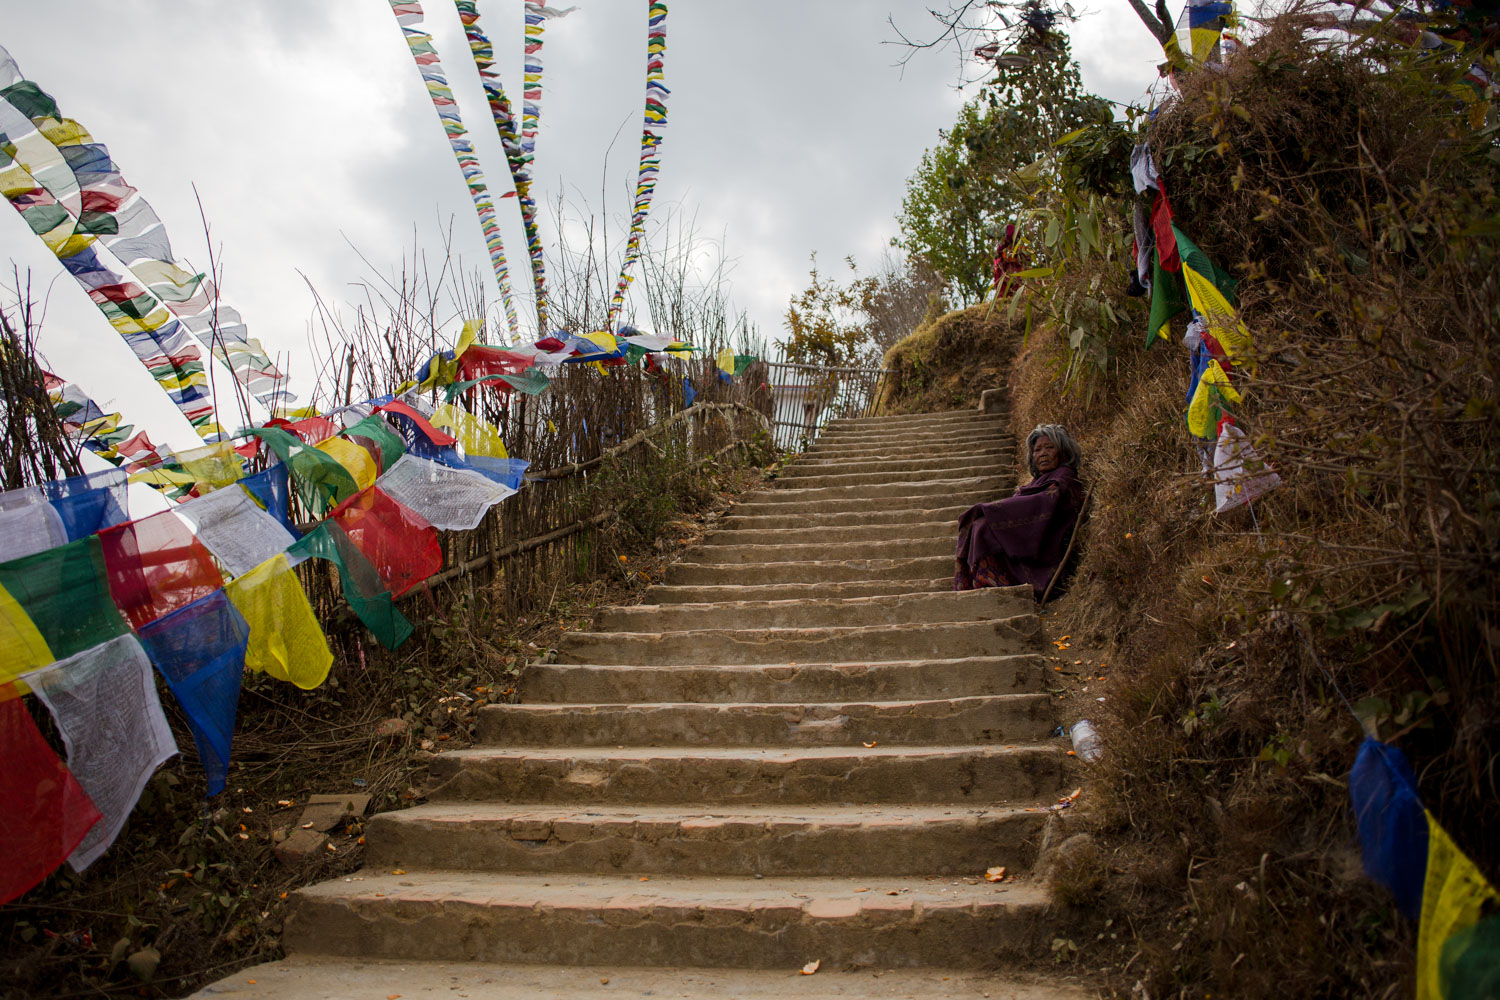 Woman-sitting-on-stairs-at-temple-in-nepal.jpg